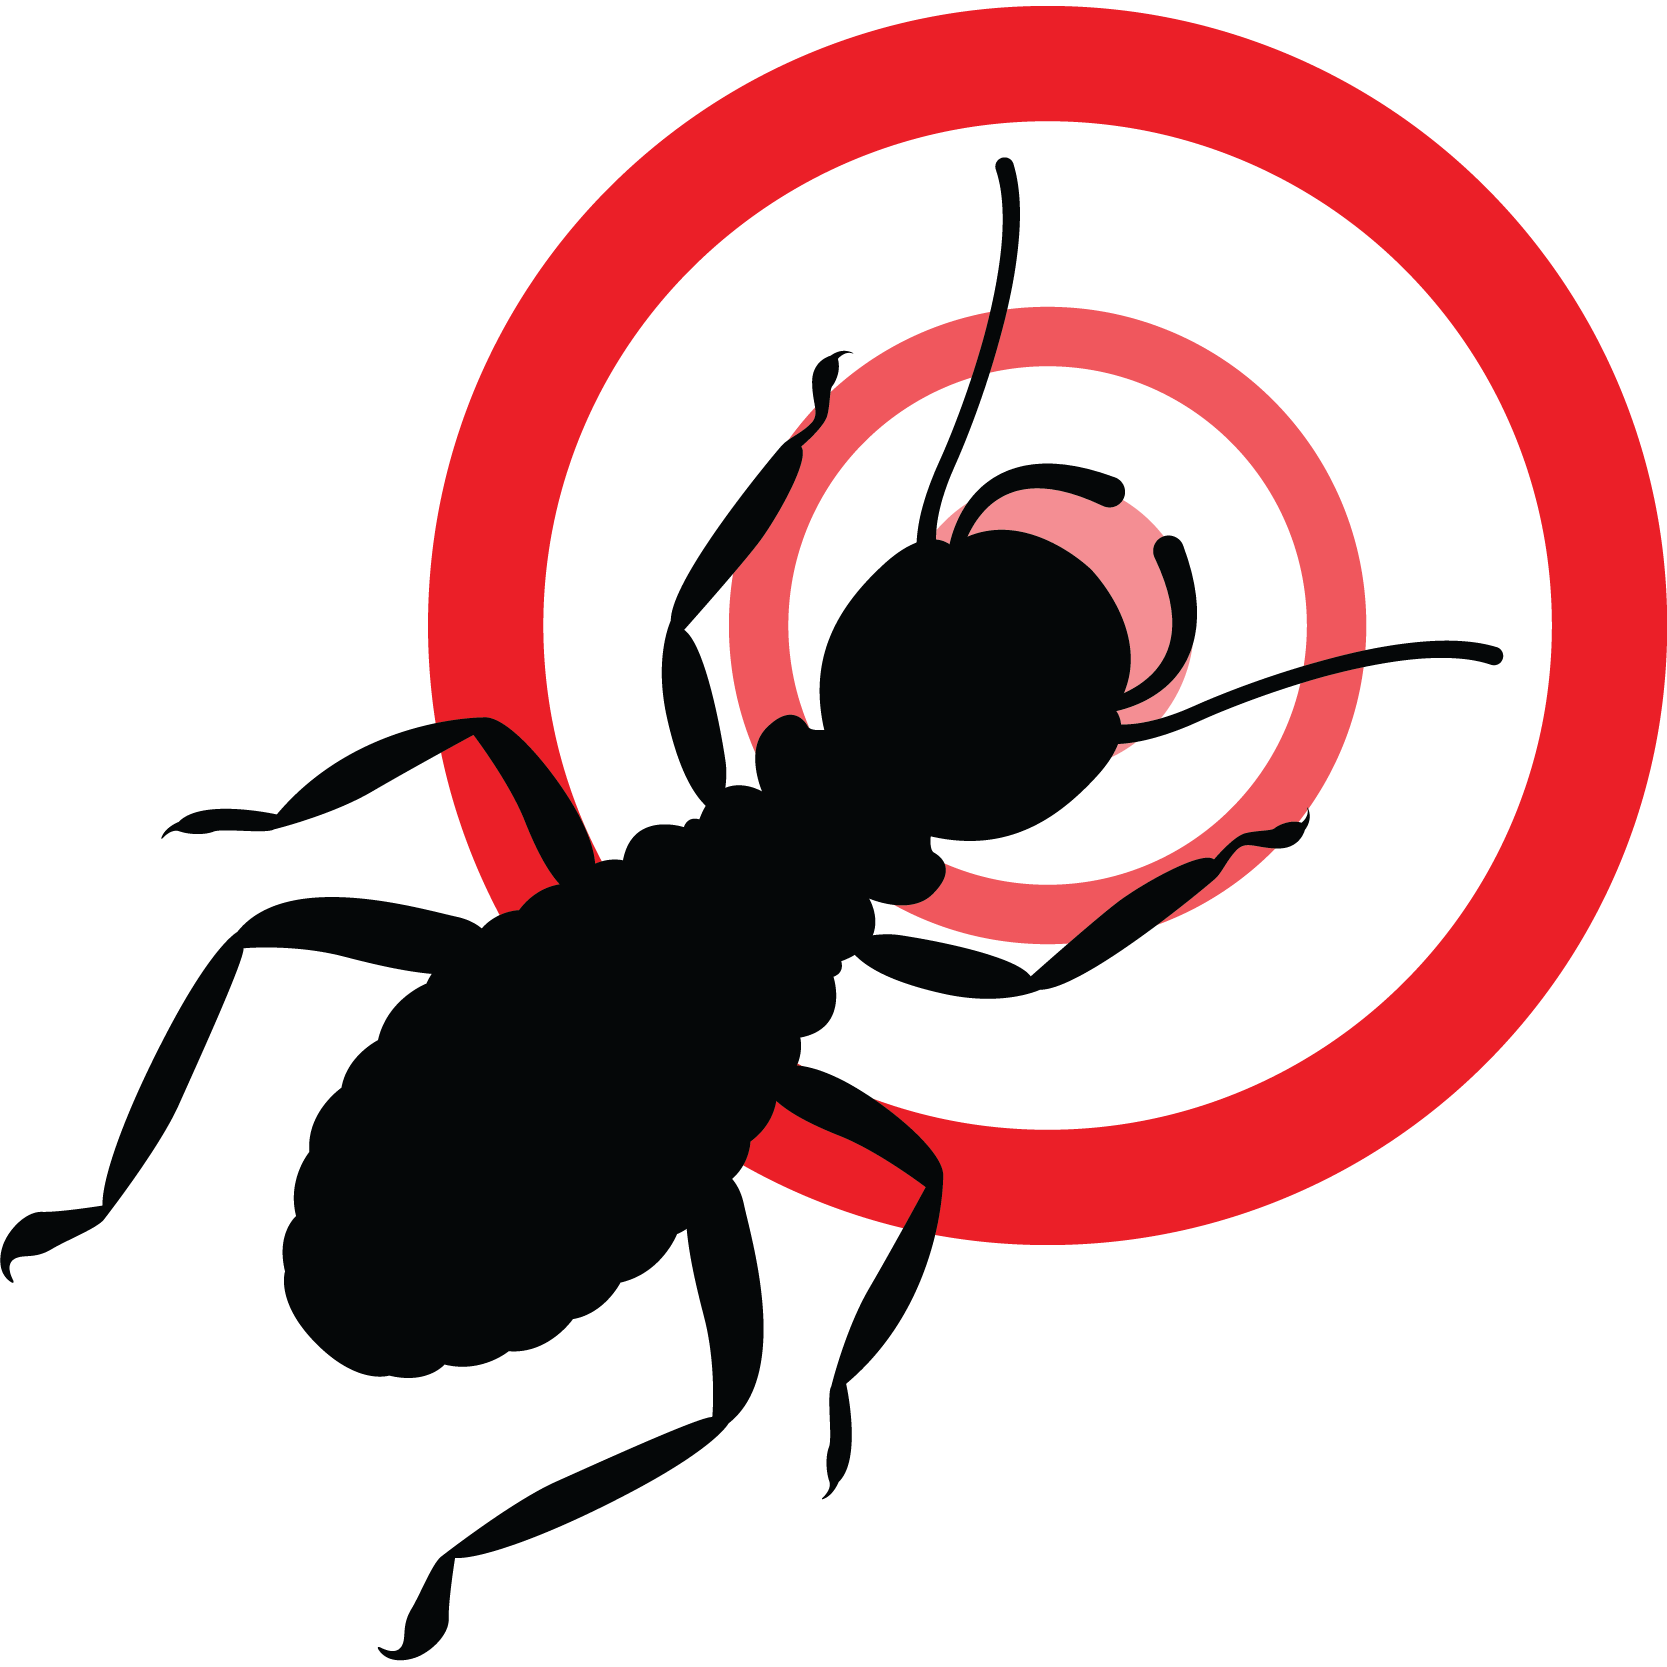 Ant with red circles representing the termite control service